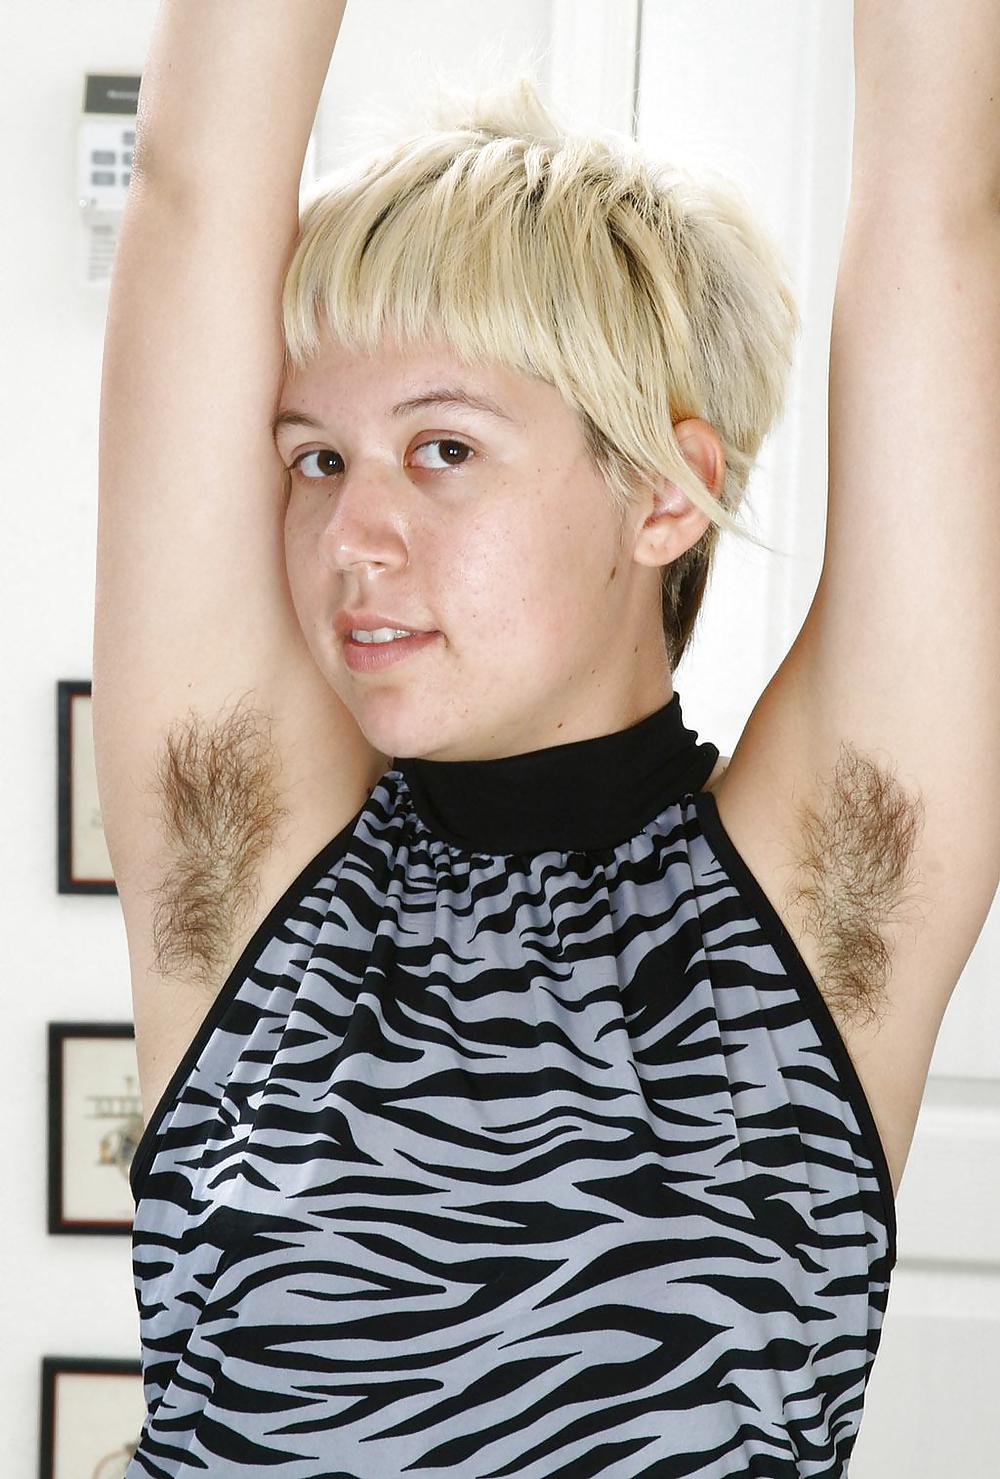 Miscellaneous girls showing hairy, unshaven armpits 5 #35783594